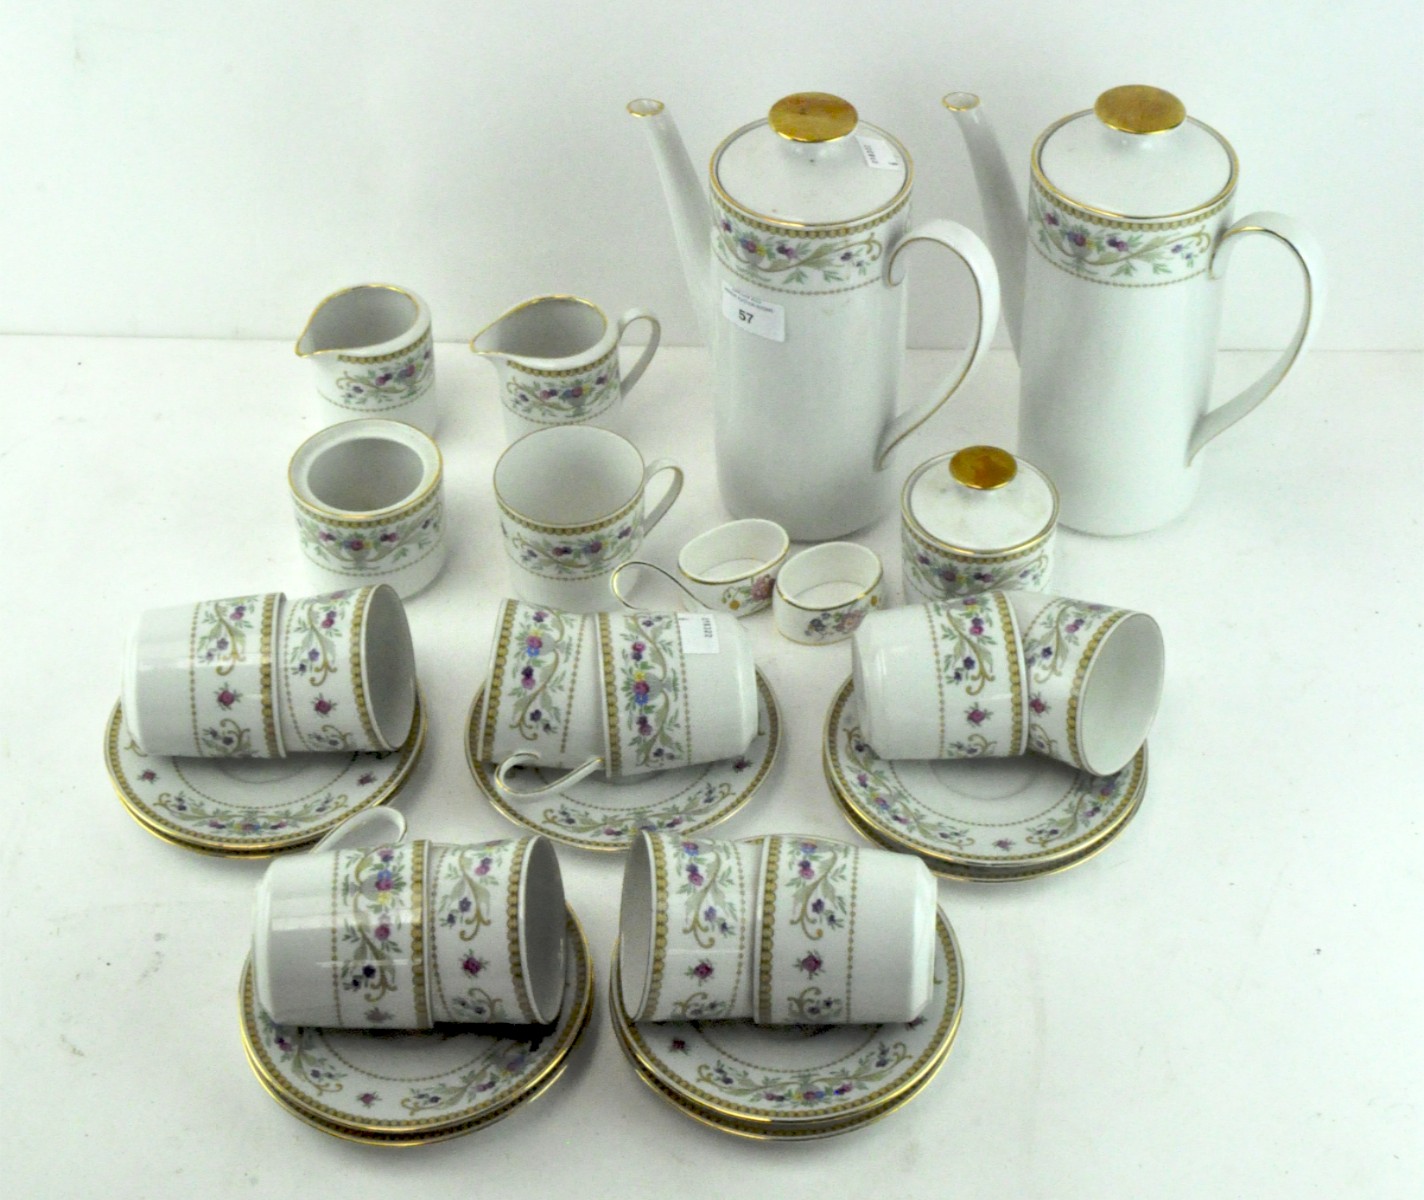 A German coffee service by Seltmann Weiden, with floral printed patterns, comprising coffee pots,